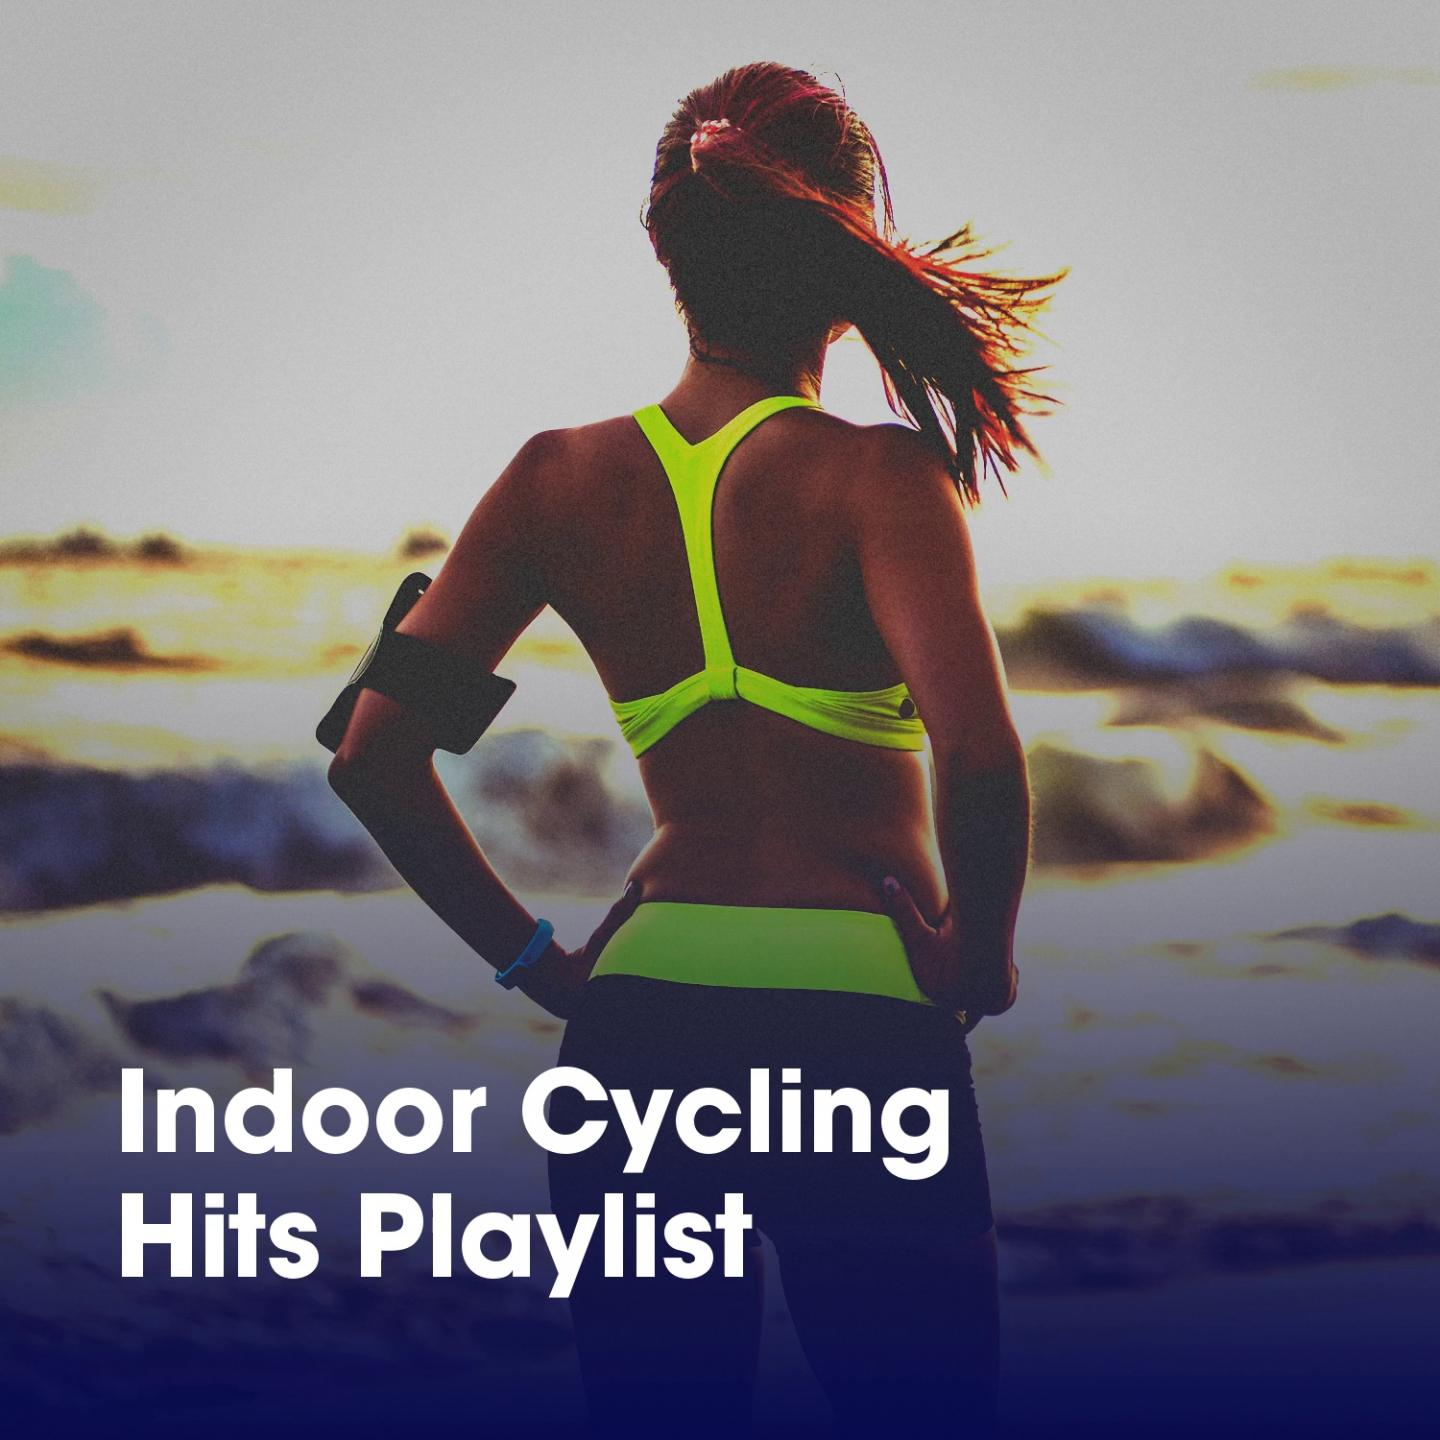 Indoor Cycling Hits Playlist